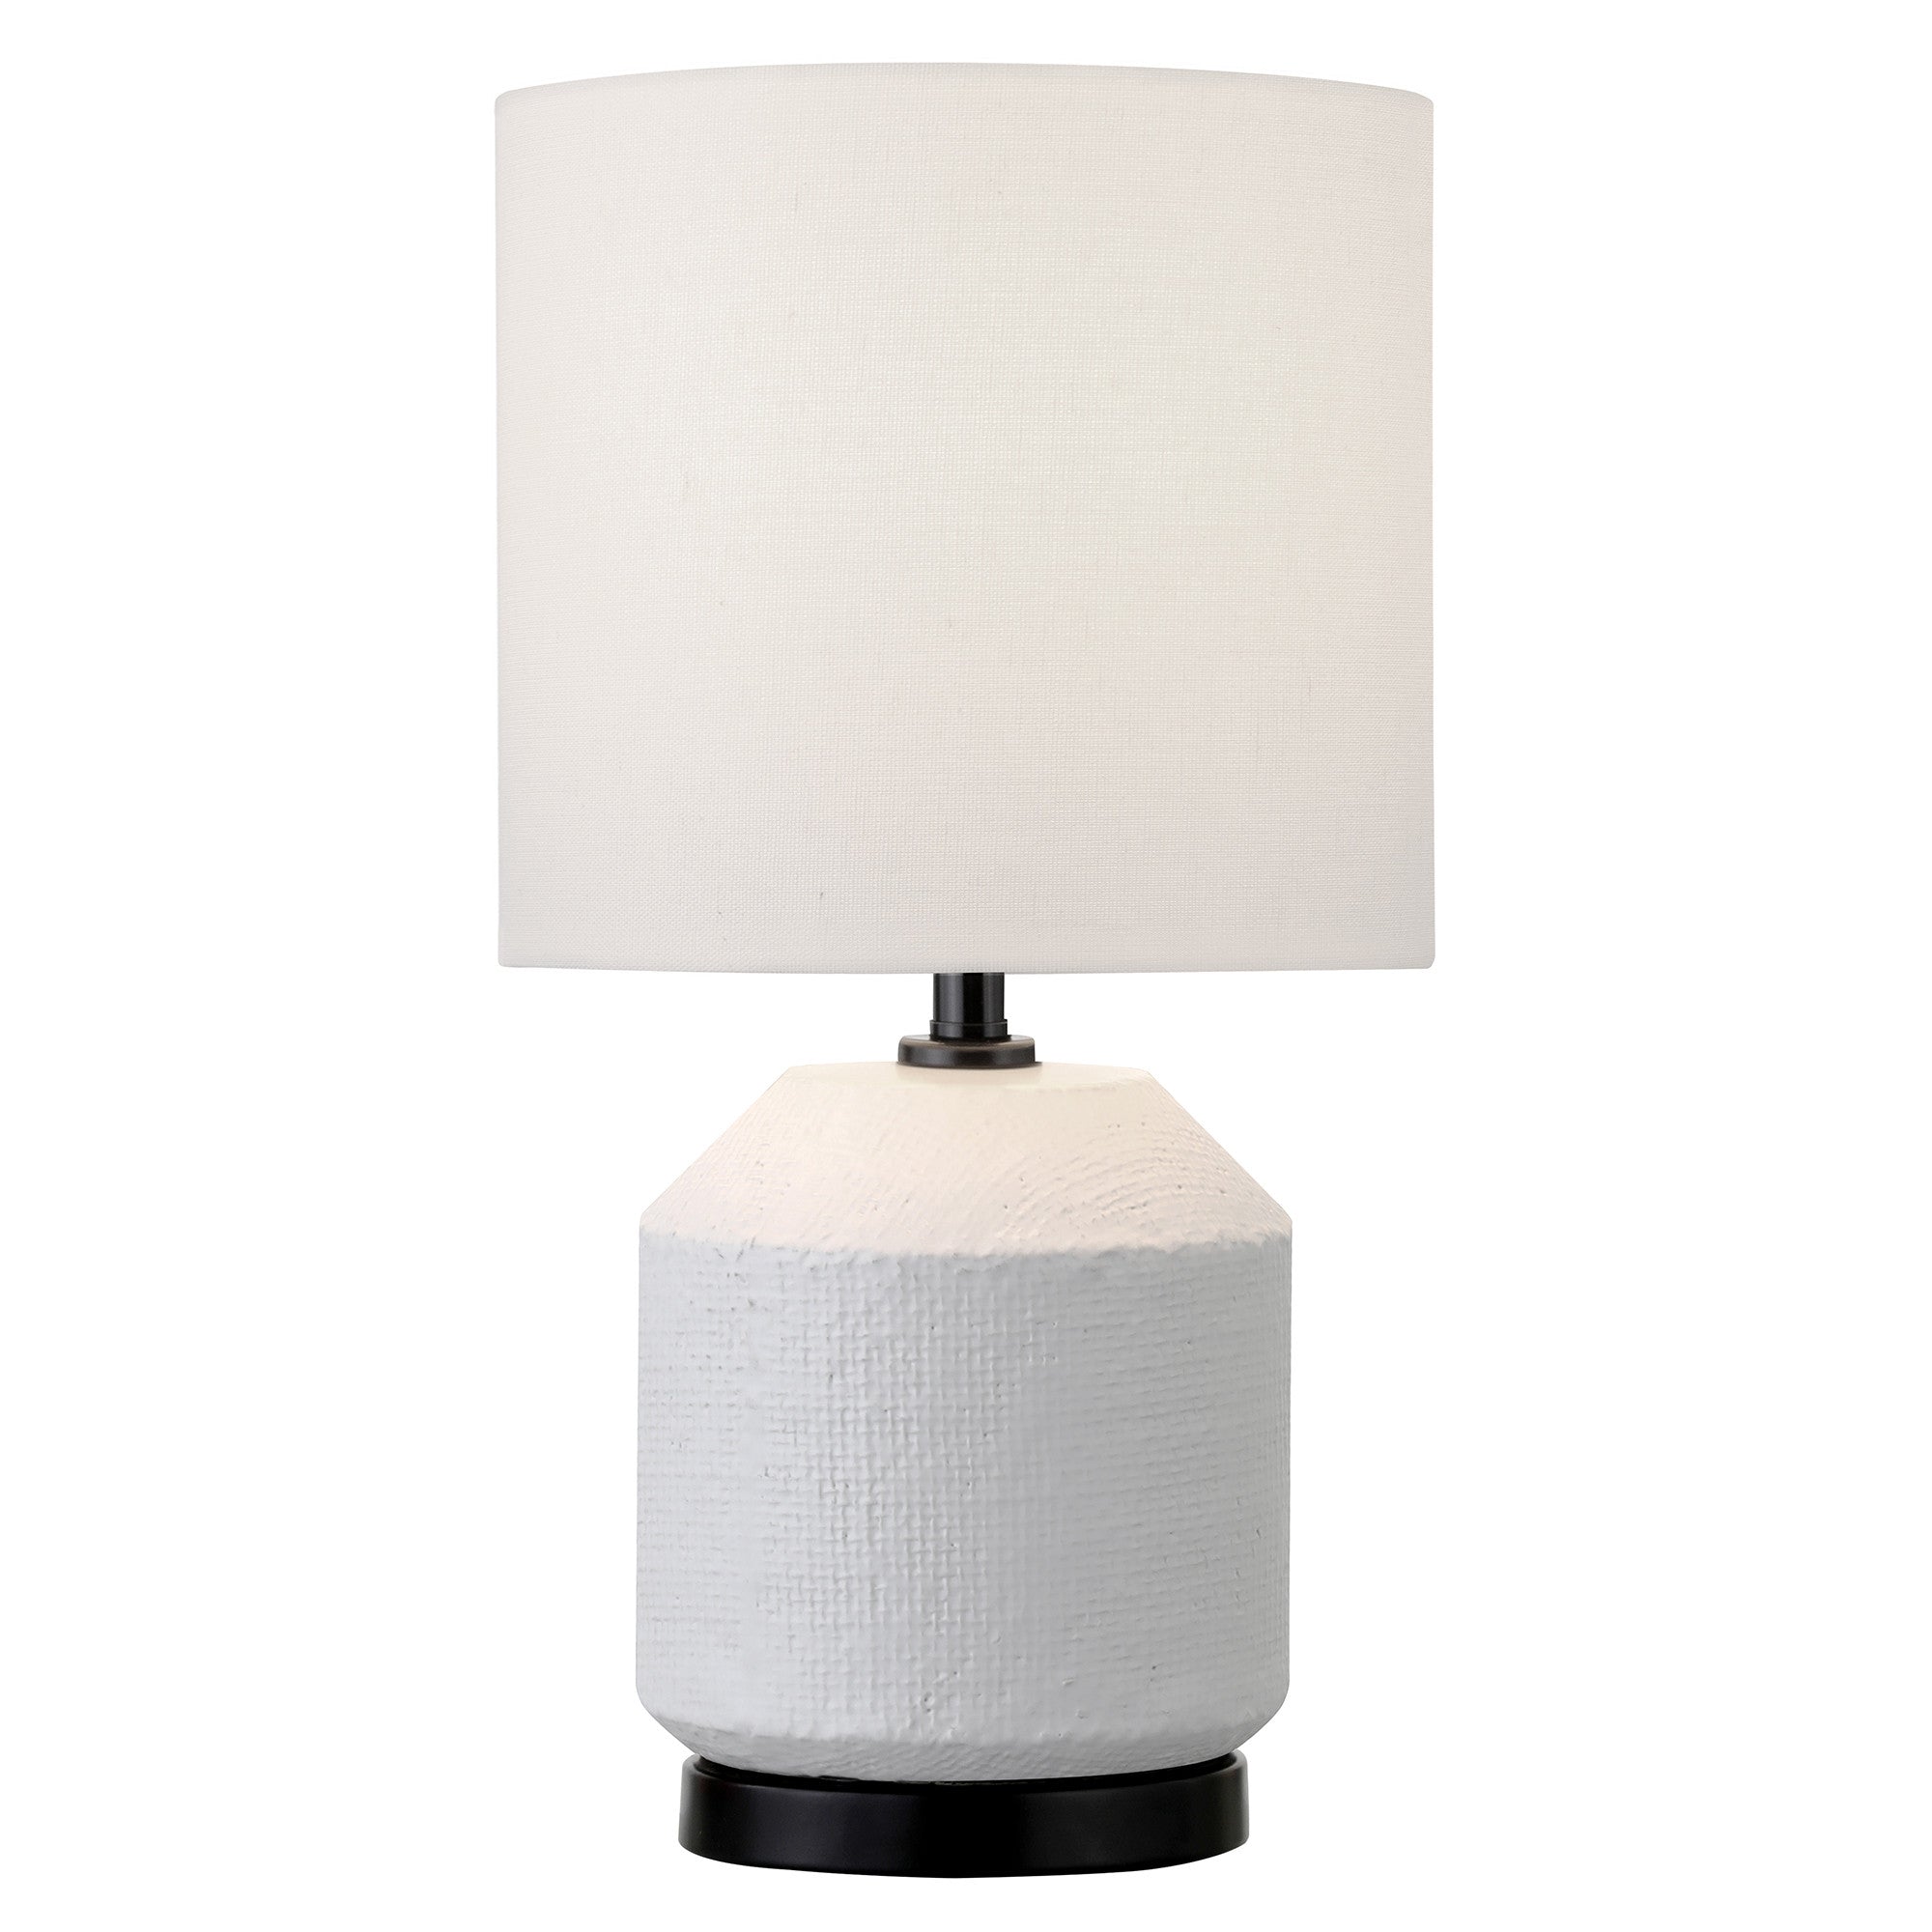 15" Black and White Ceramic Cylinder Table Lamp With White Drum Shade